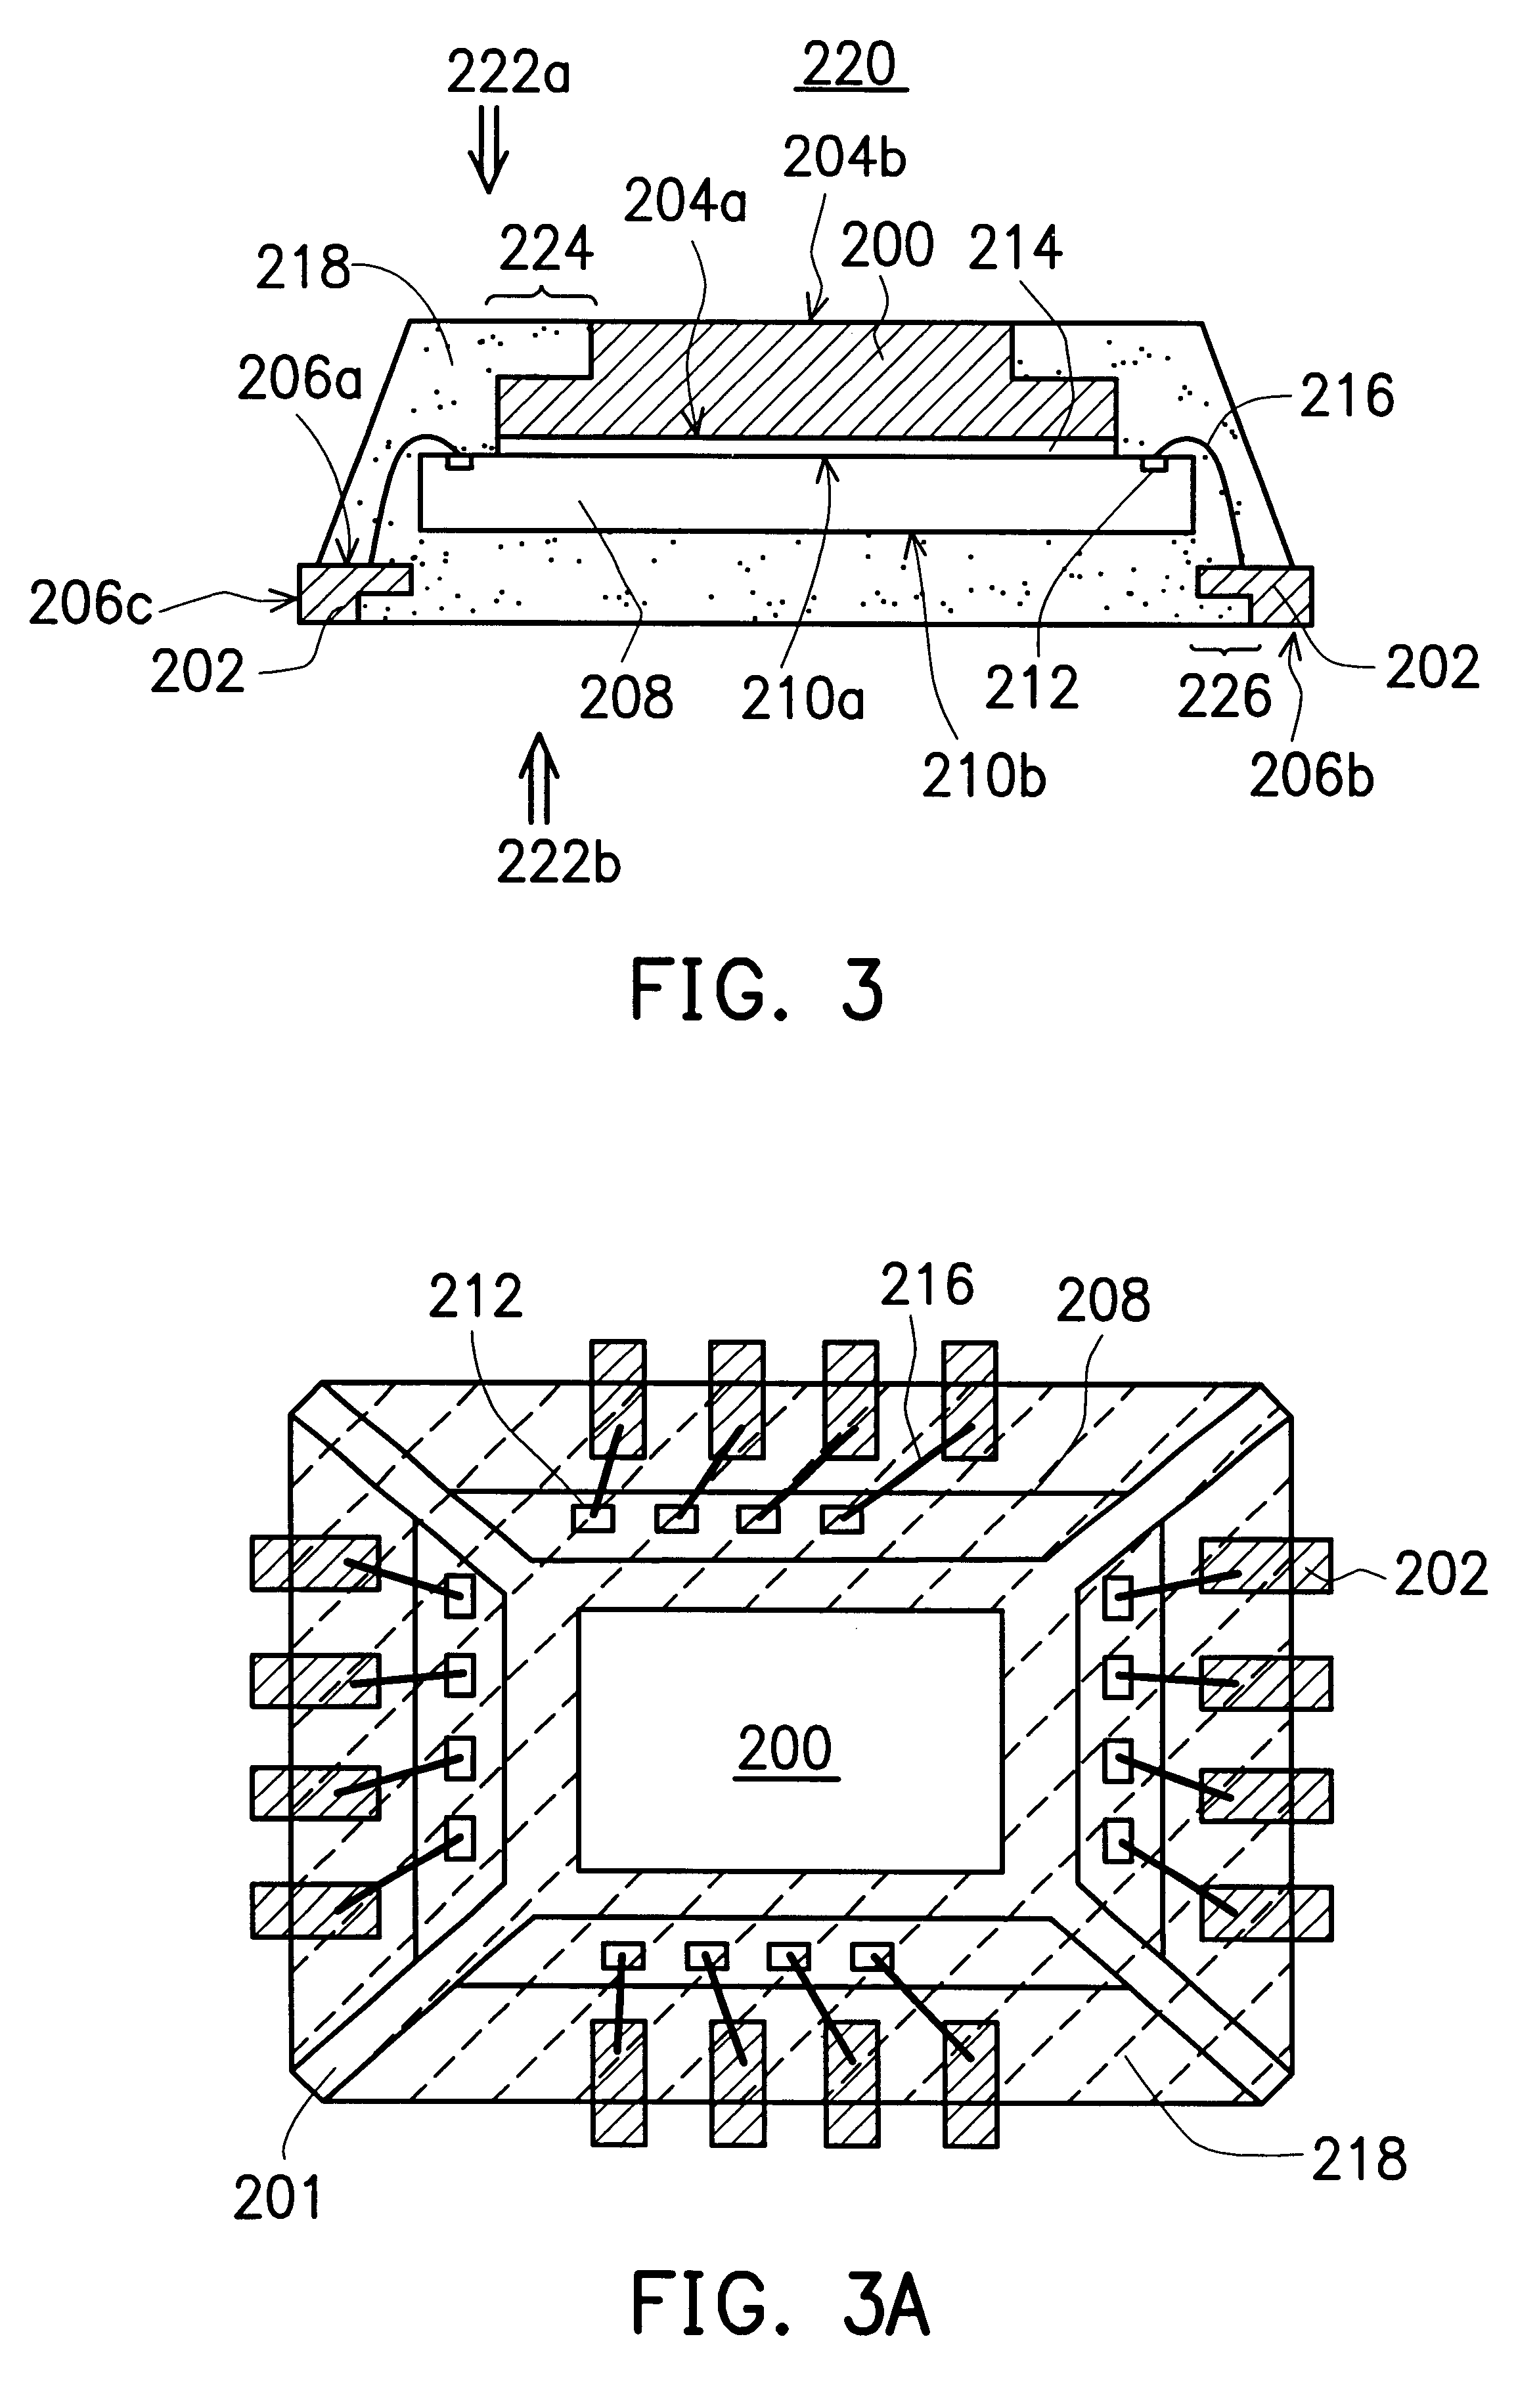 Quad flat non-lead package of semiconductor